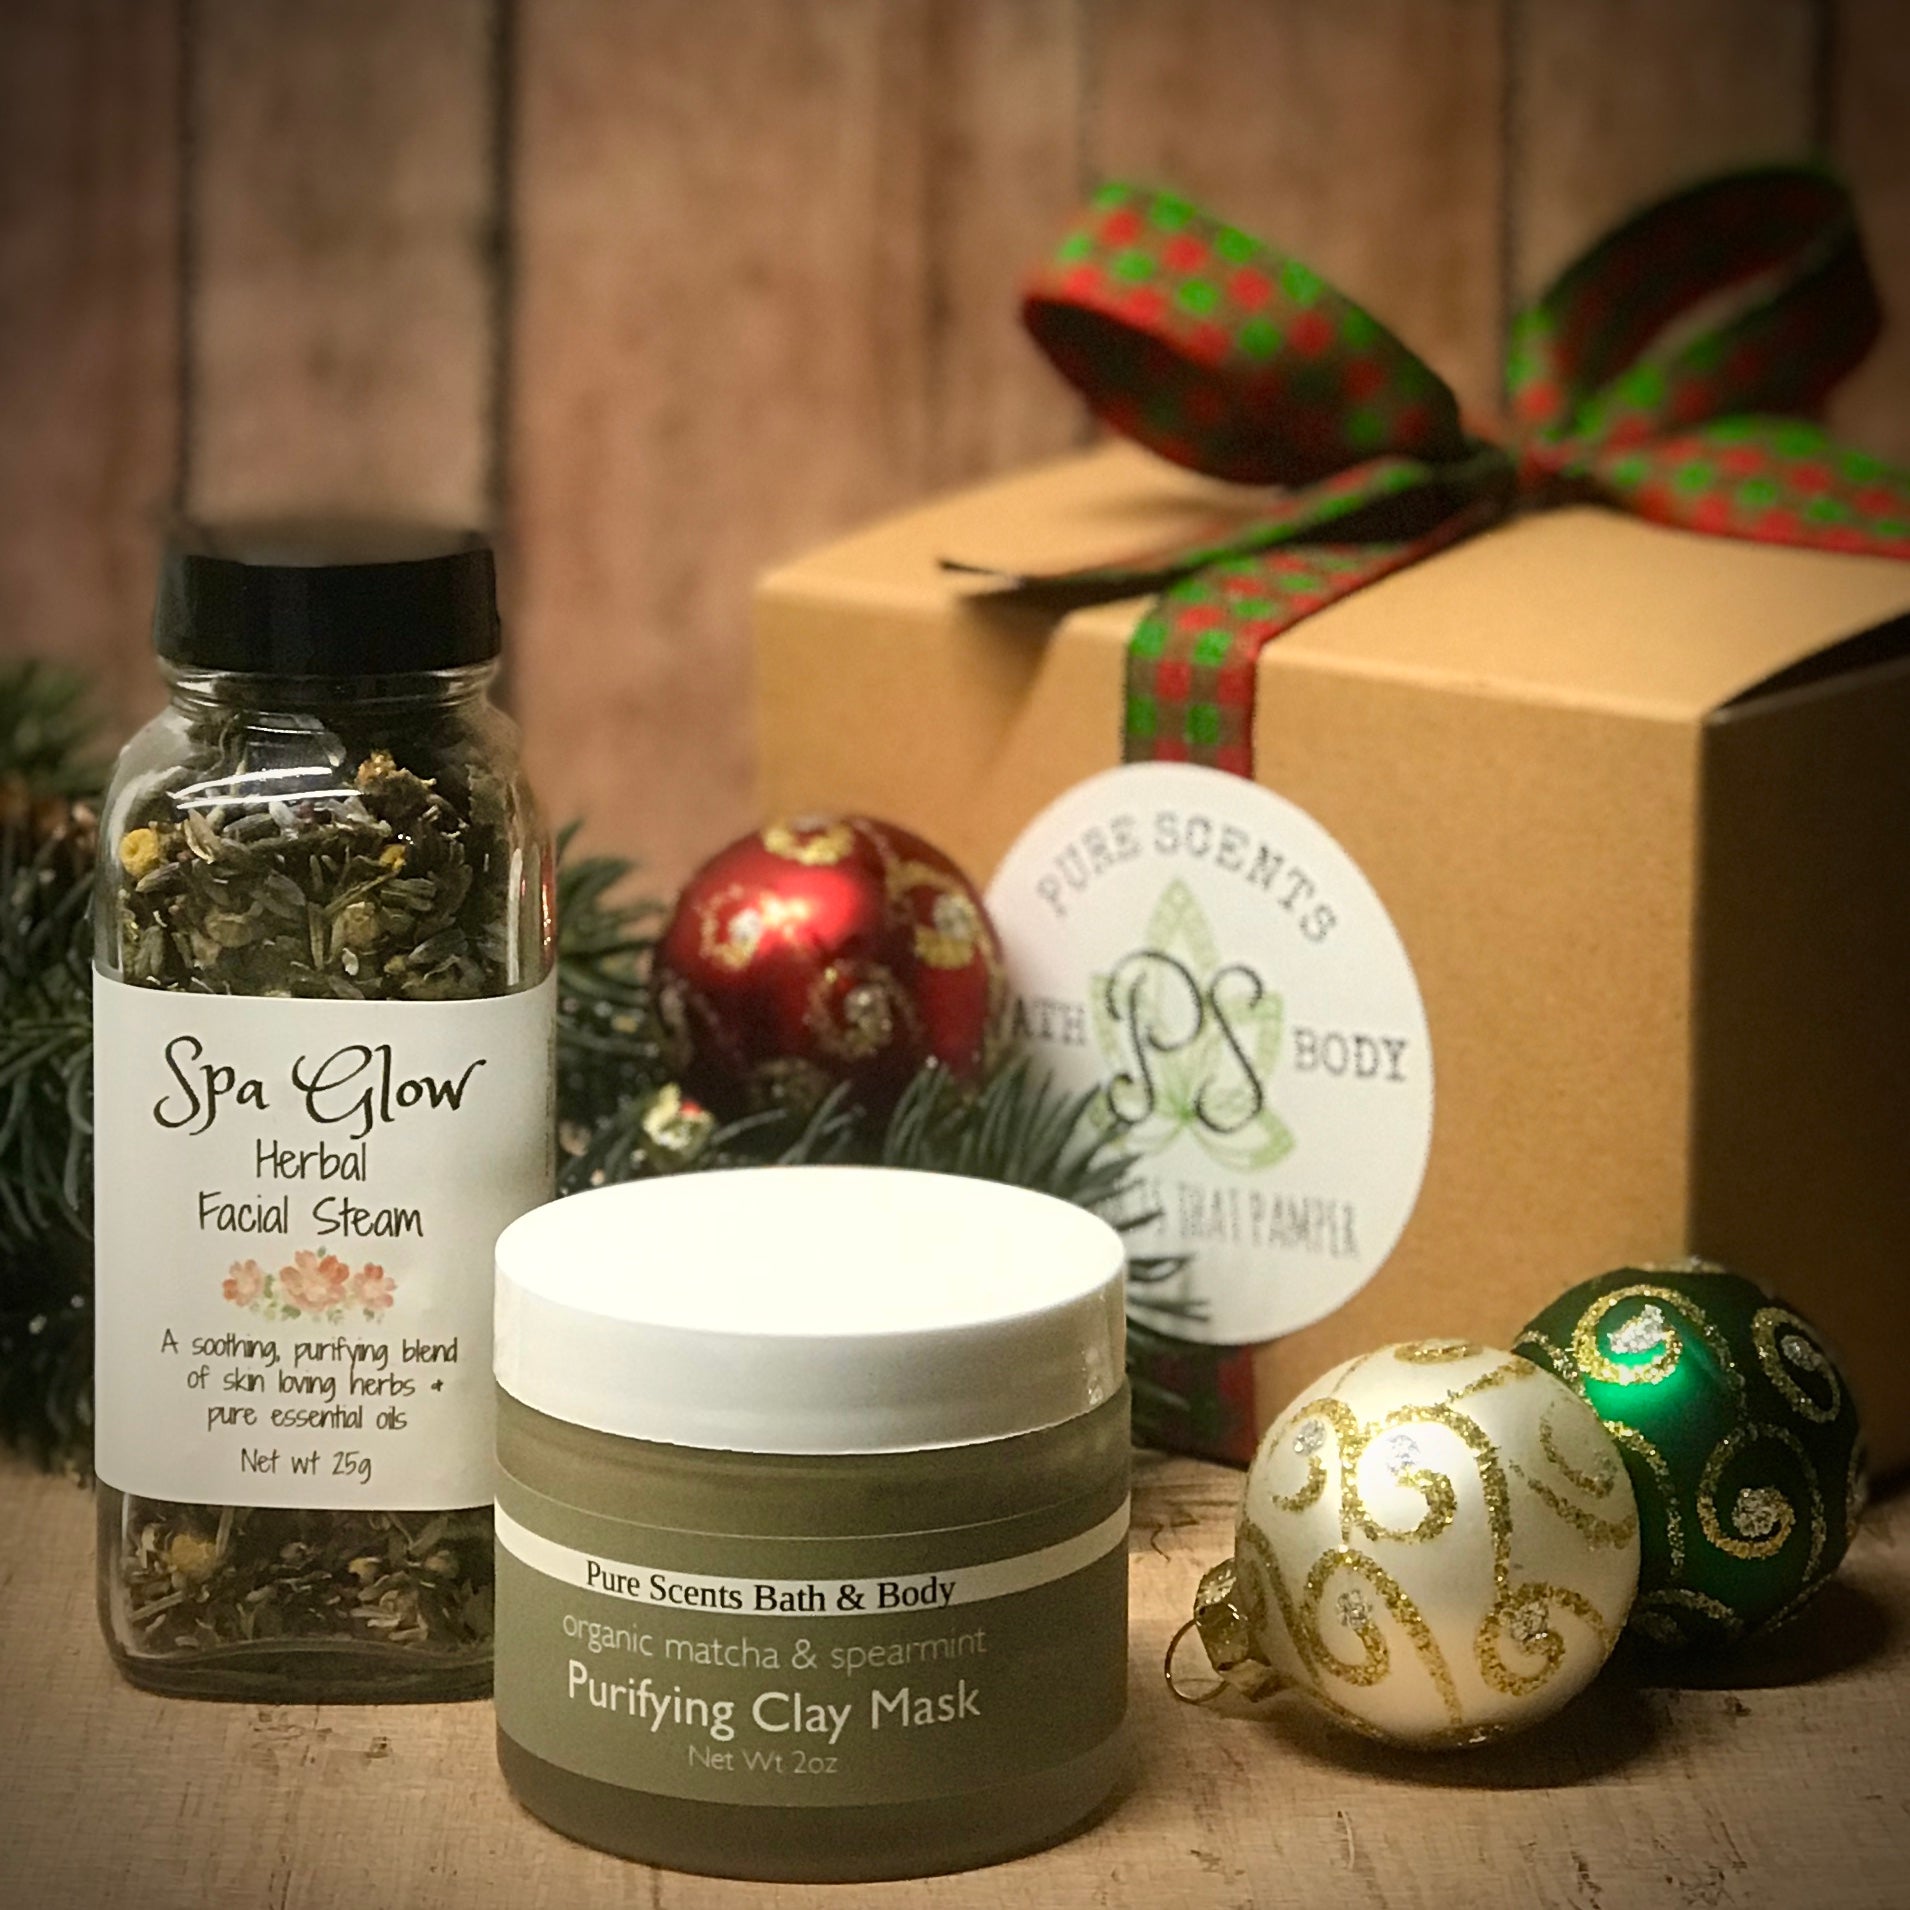 Herbal Dreams mini gift set with Spa Glow Herbal Facial Steam Treatment Organic Tea and Purifying Matcha Green Tea and Spearmint Clay Mask by Pure Scents Bath and Body